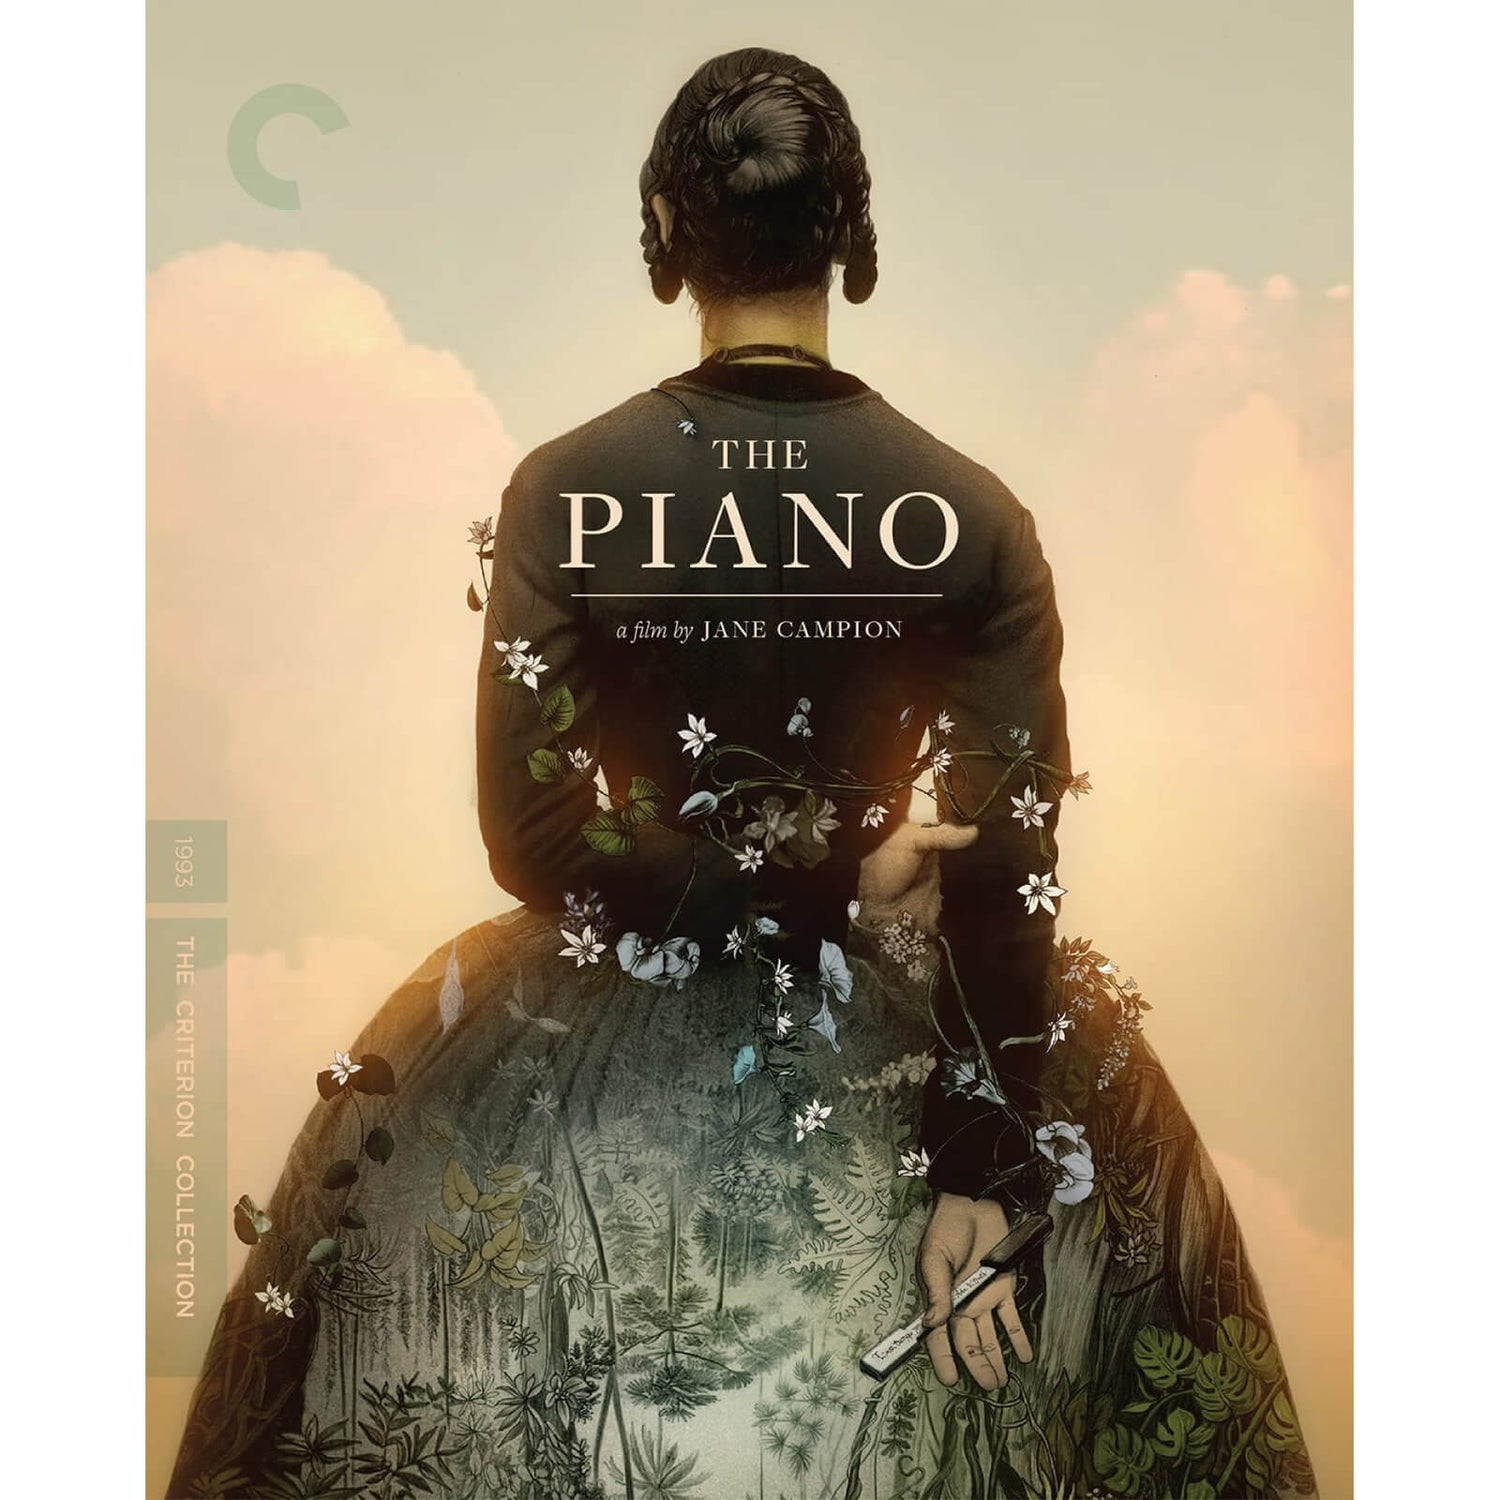 The Piano - The Criterion Collection 4K Ultra HD (Includes Blu-ray) (US Import)